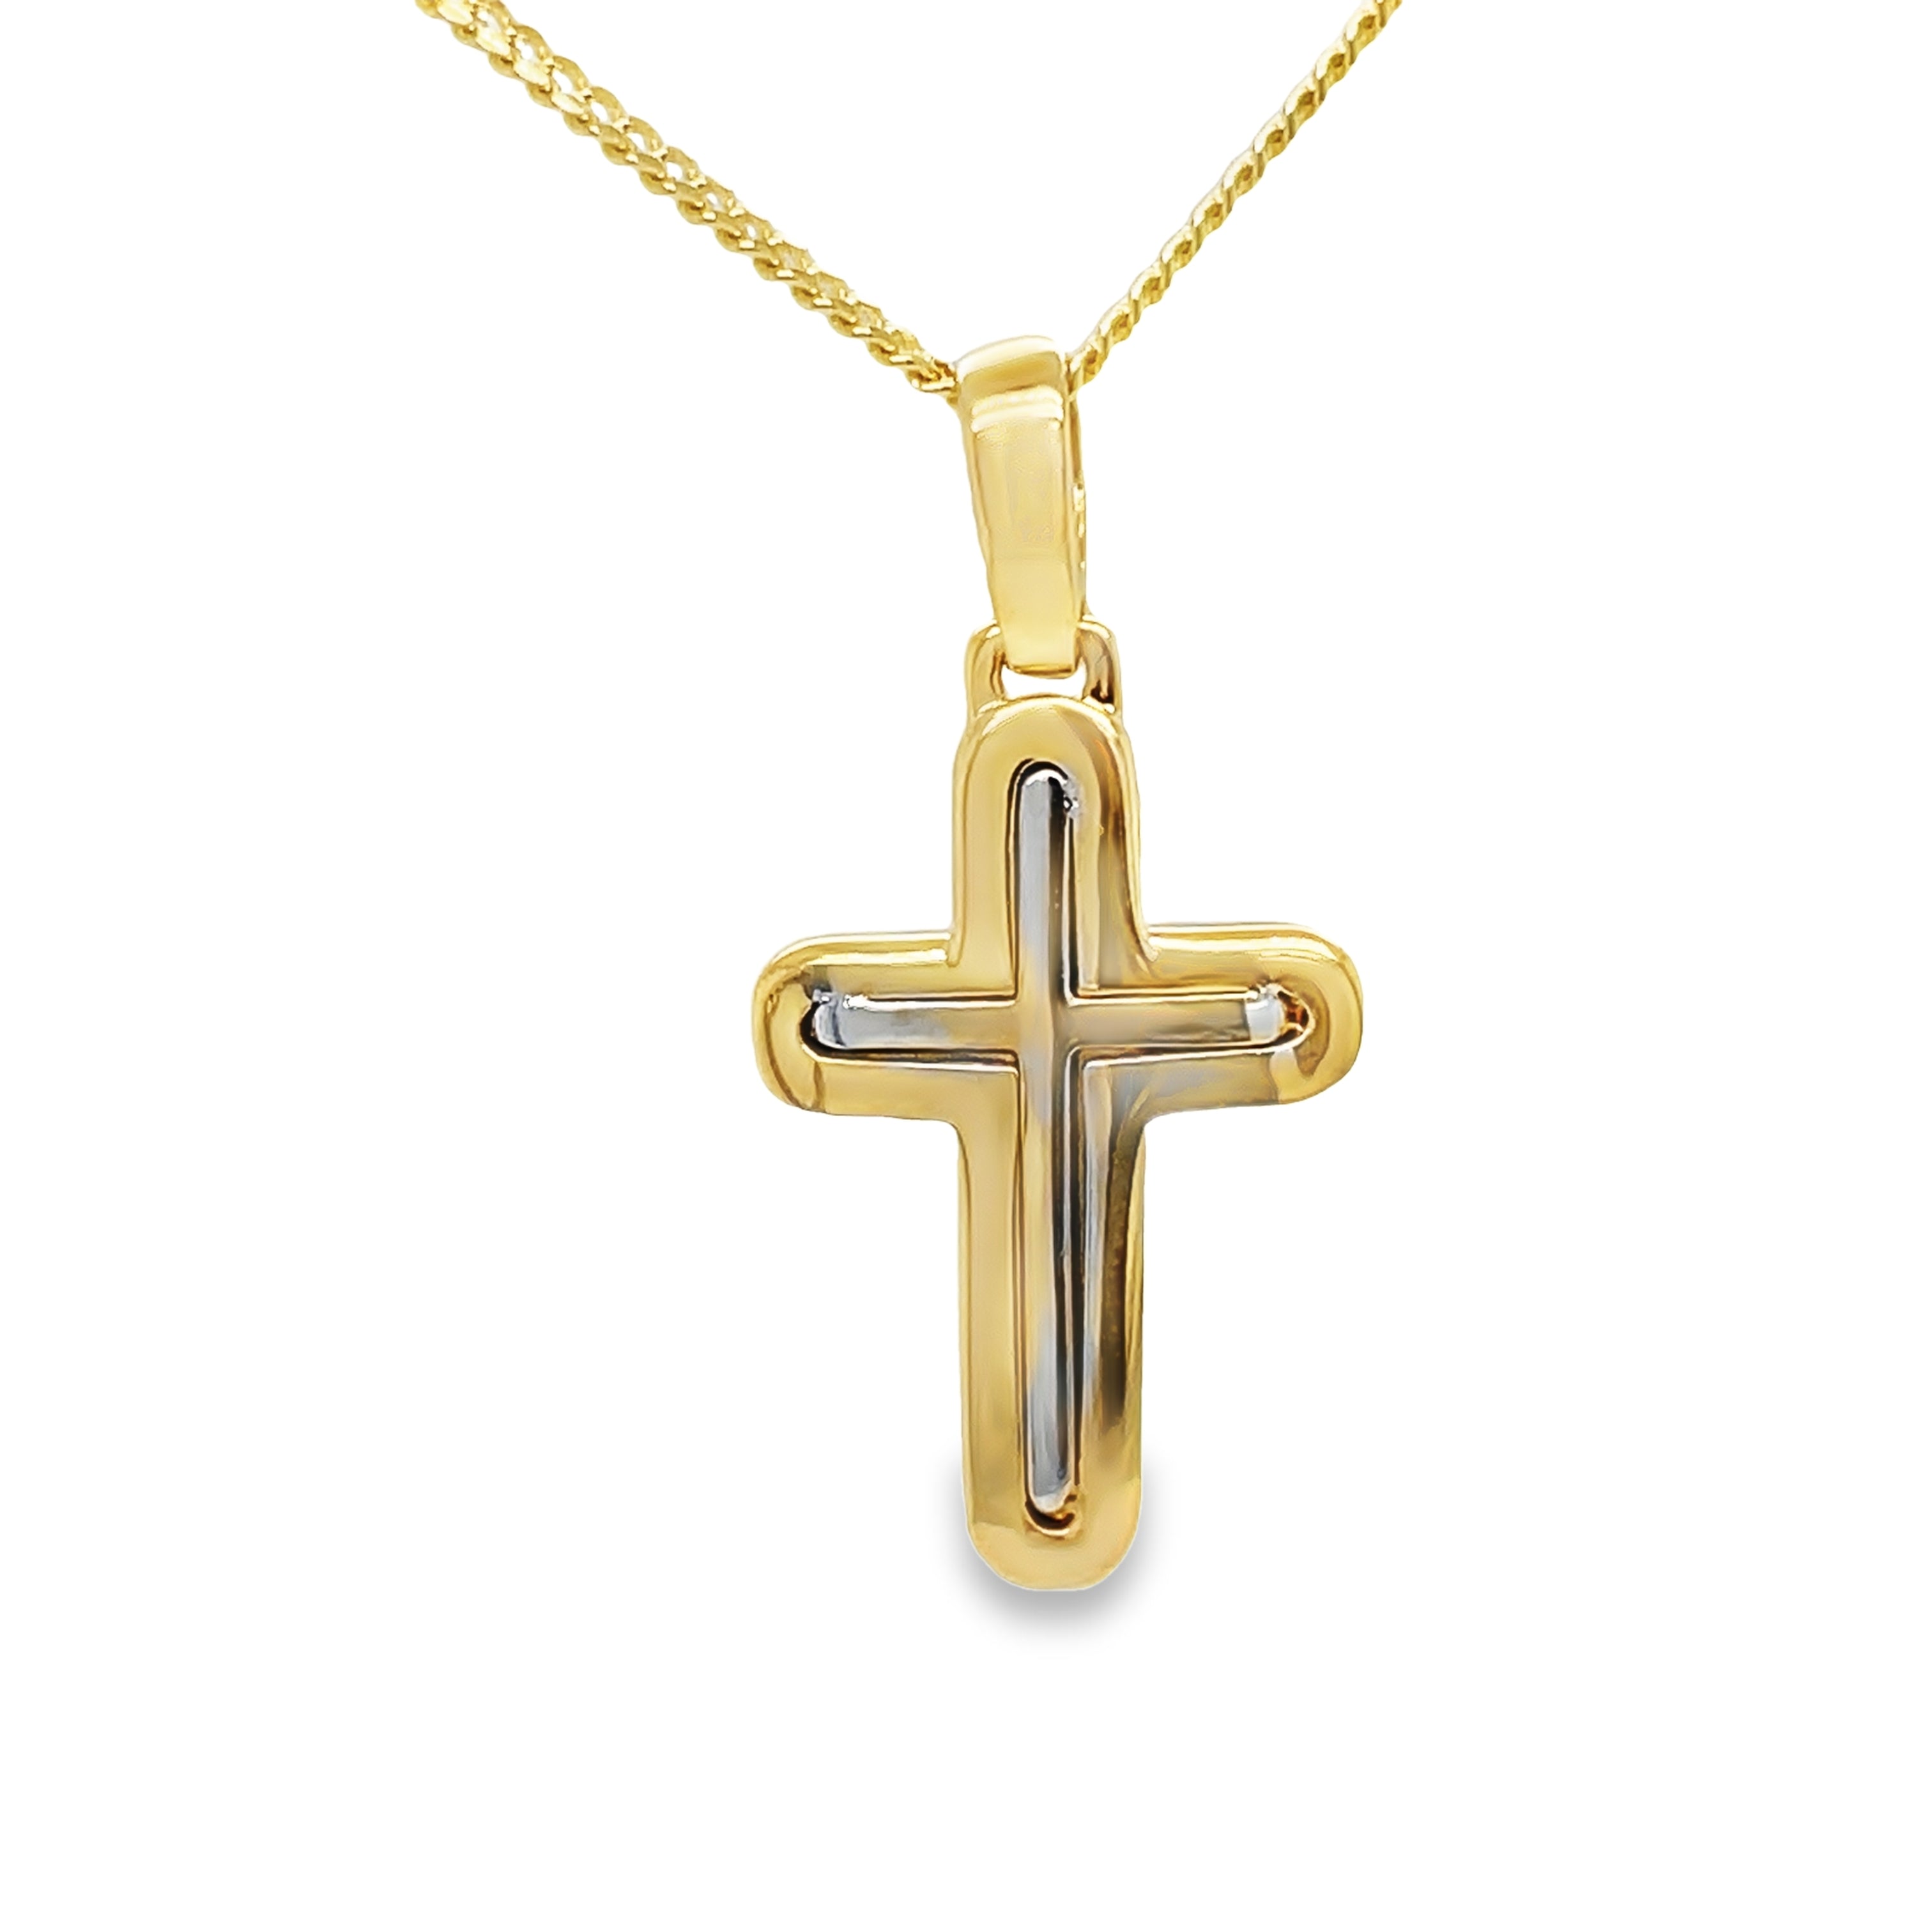 Crafted with expertise in Italy, this 14kt two-tone gold cross showcases timeless elegance. The 14 karat yellow gold shines radiantly, while the optional 14 karat yellow gold chain complements the intricate design. At one inch long, this cross is the perfect addition to any jewelry collection.